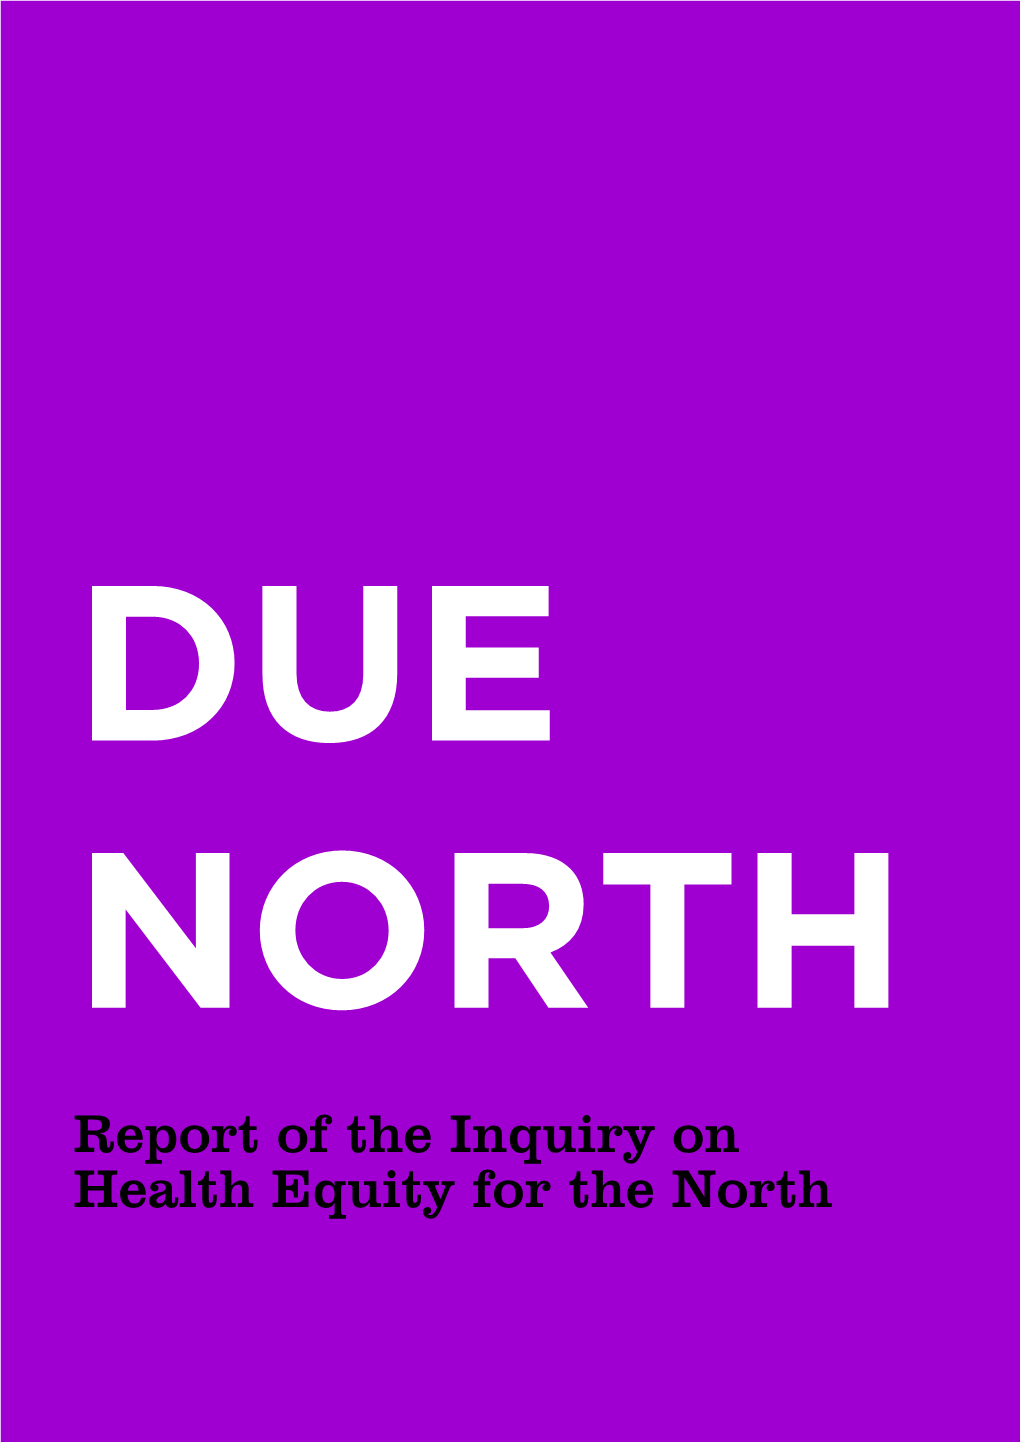 Due North: the Report of the Inquiry on Health Equity for the North